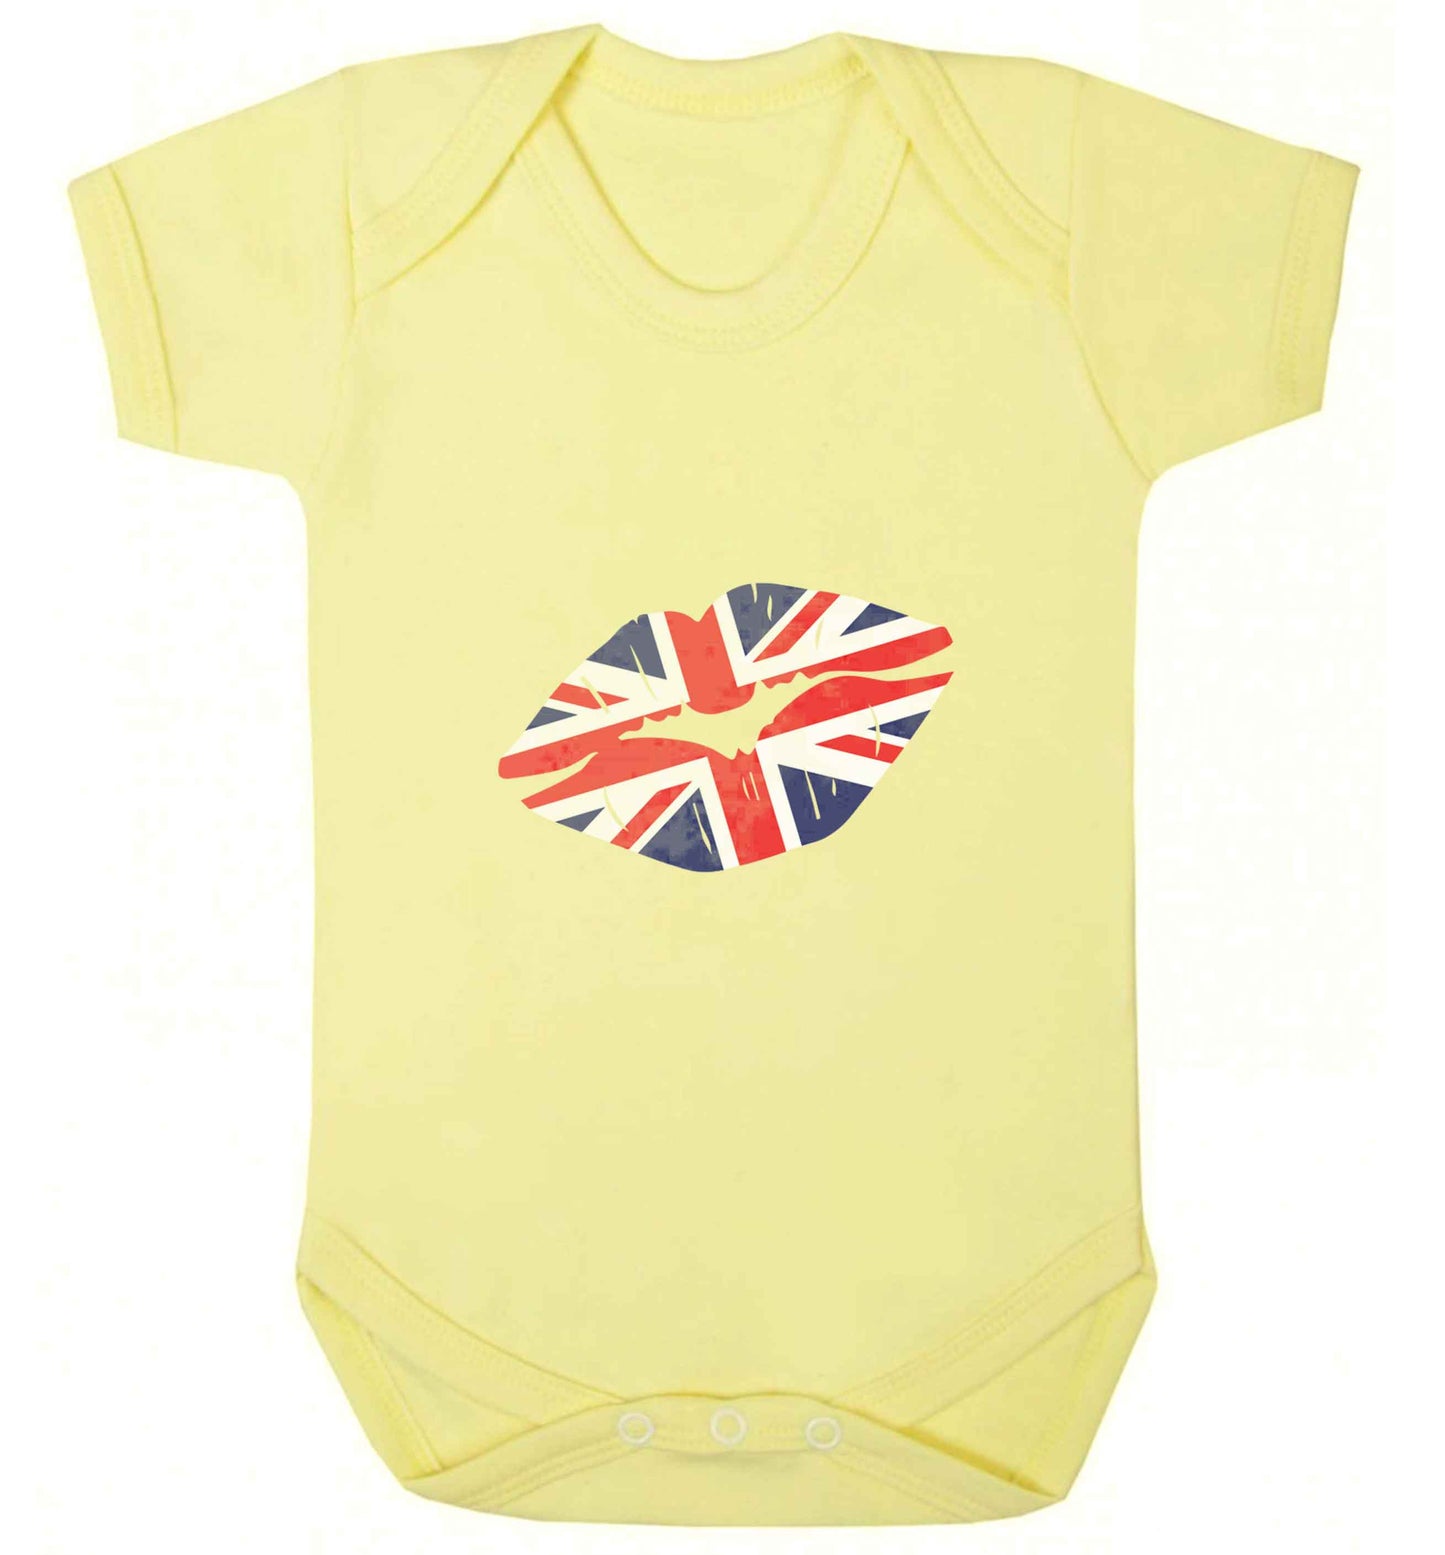 British flag kiss baby vest pale yellow 18-24 months